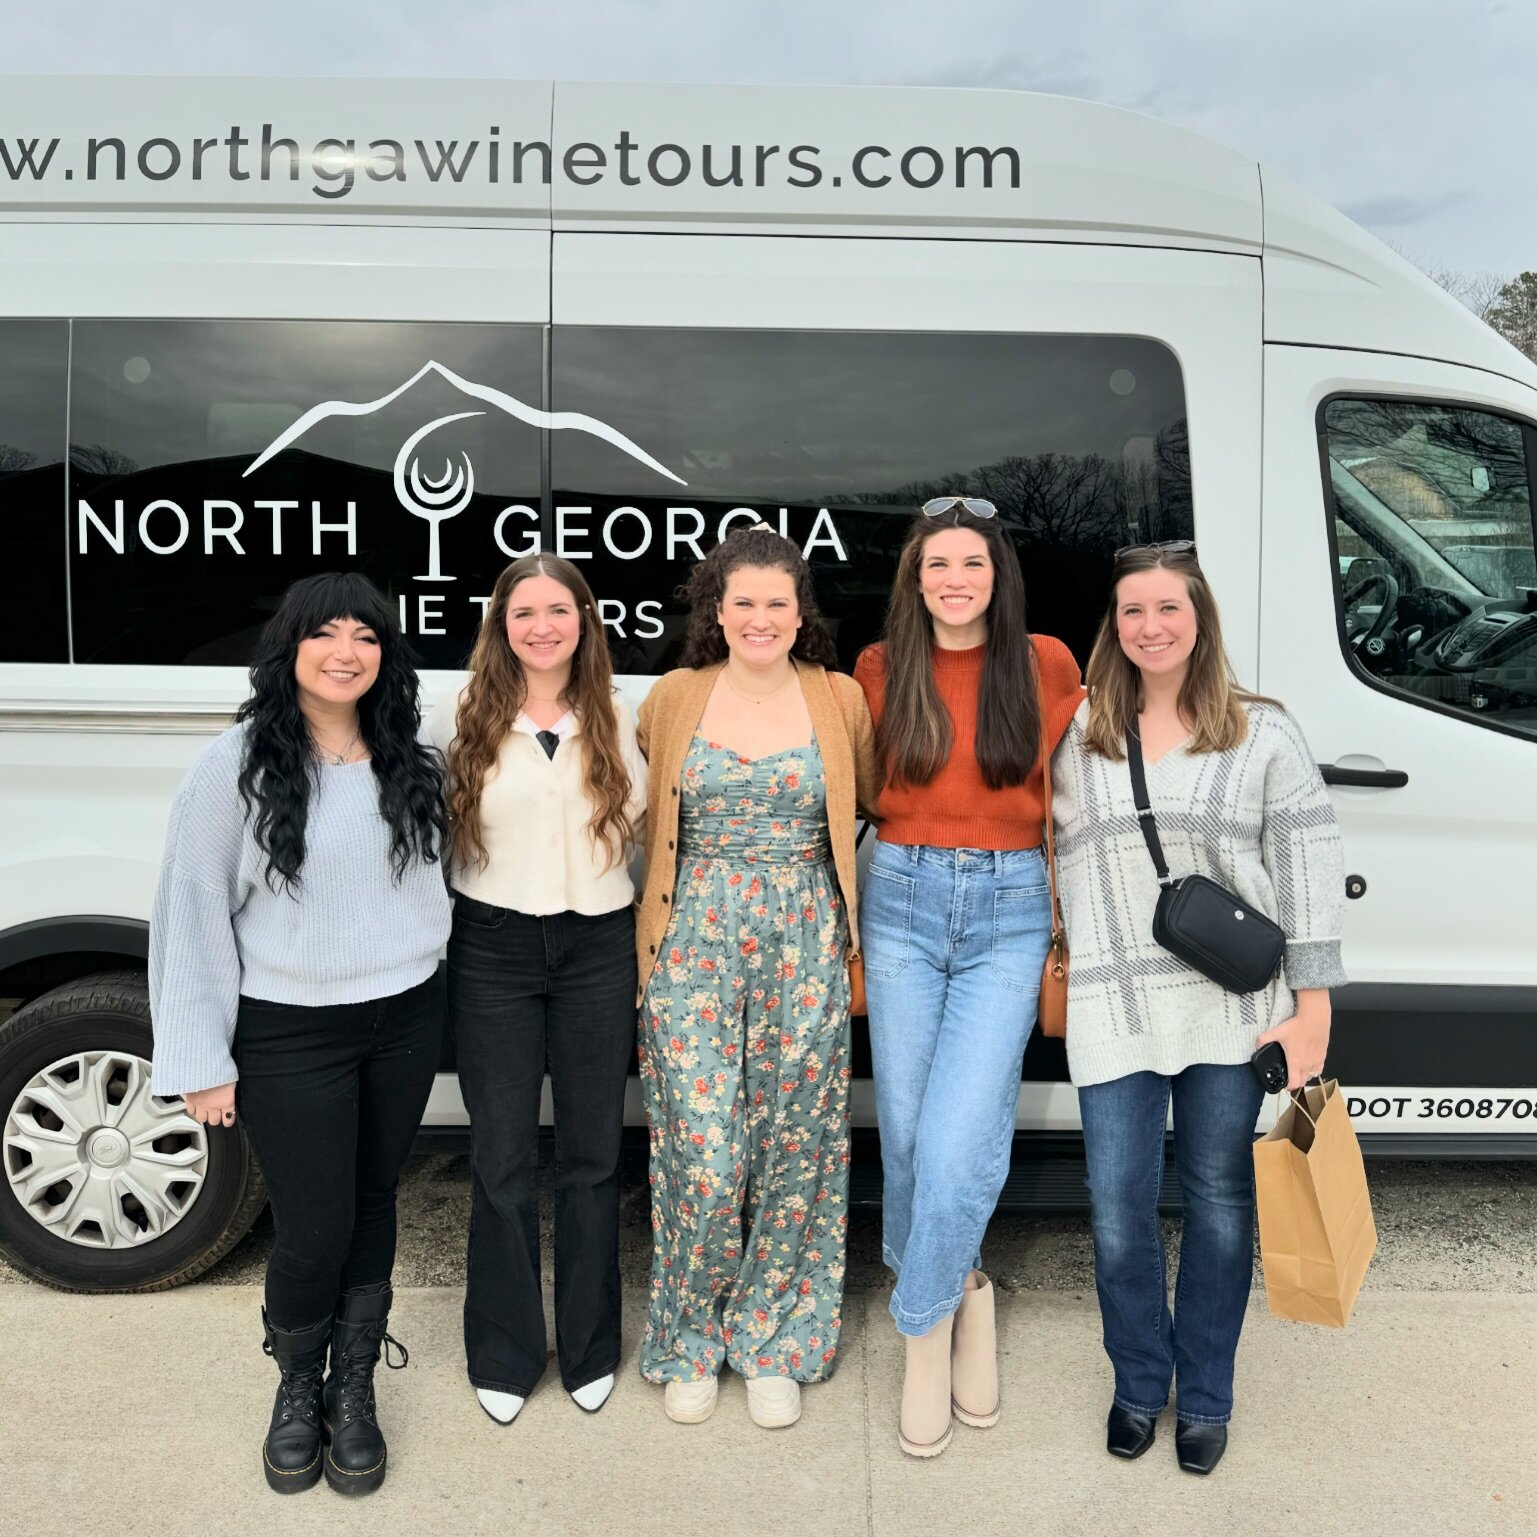 Girls trip wine tour! Pick-up / drop off in Cleveland. Itinerary: @wolfmountainvineyards @cavendercreekvw @kayavineyards 

Reach out today to book your North Georgia Wine Tour!

#northgawinetours #discoverdahlonega #dahlonegaga #experiencenorthga